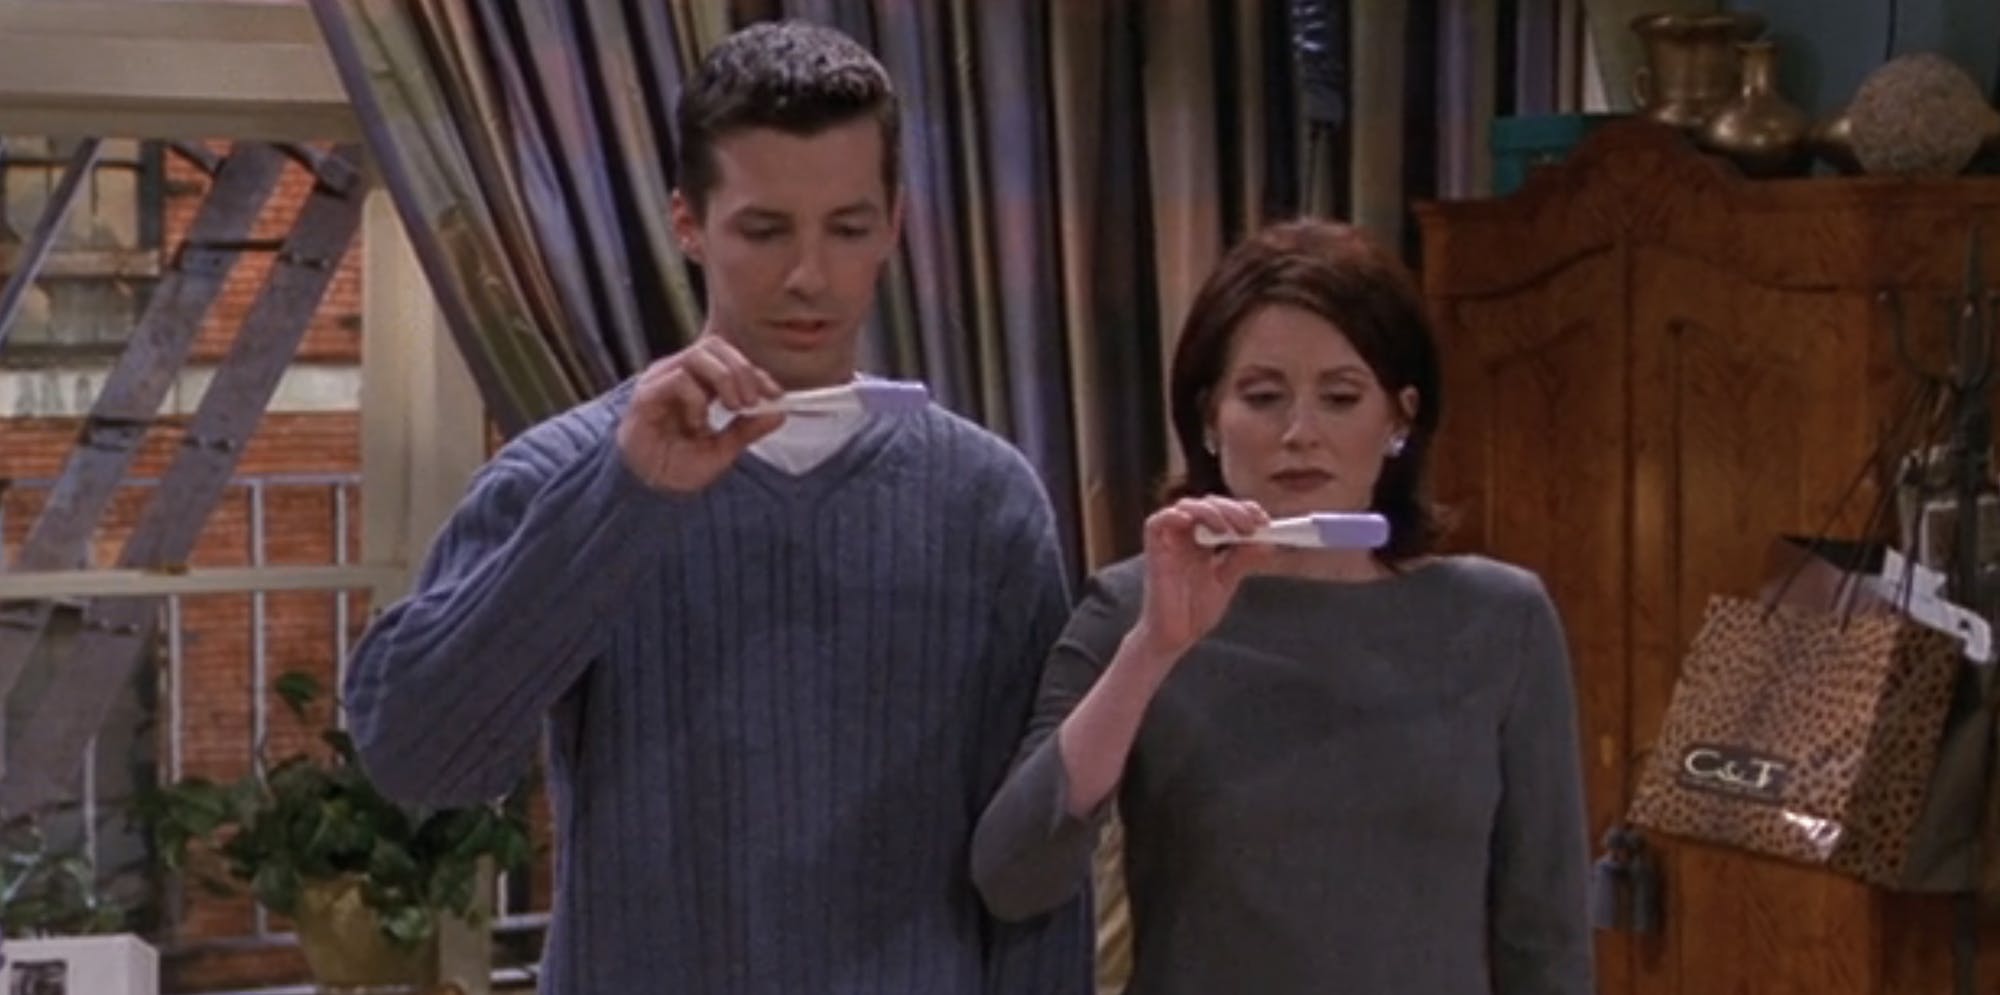 Jack and Karen in the TV show Will & Grace.